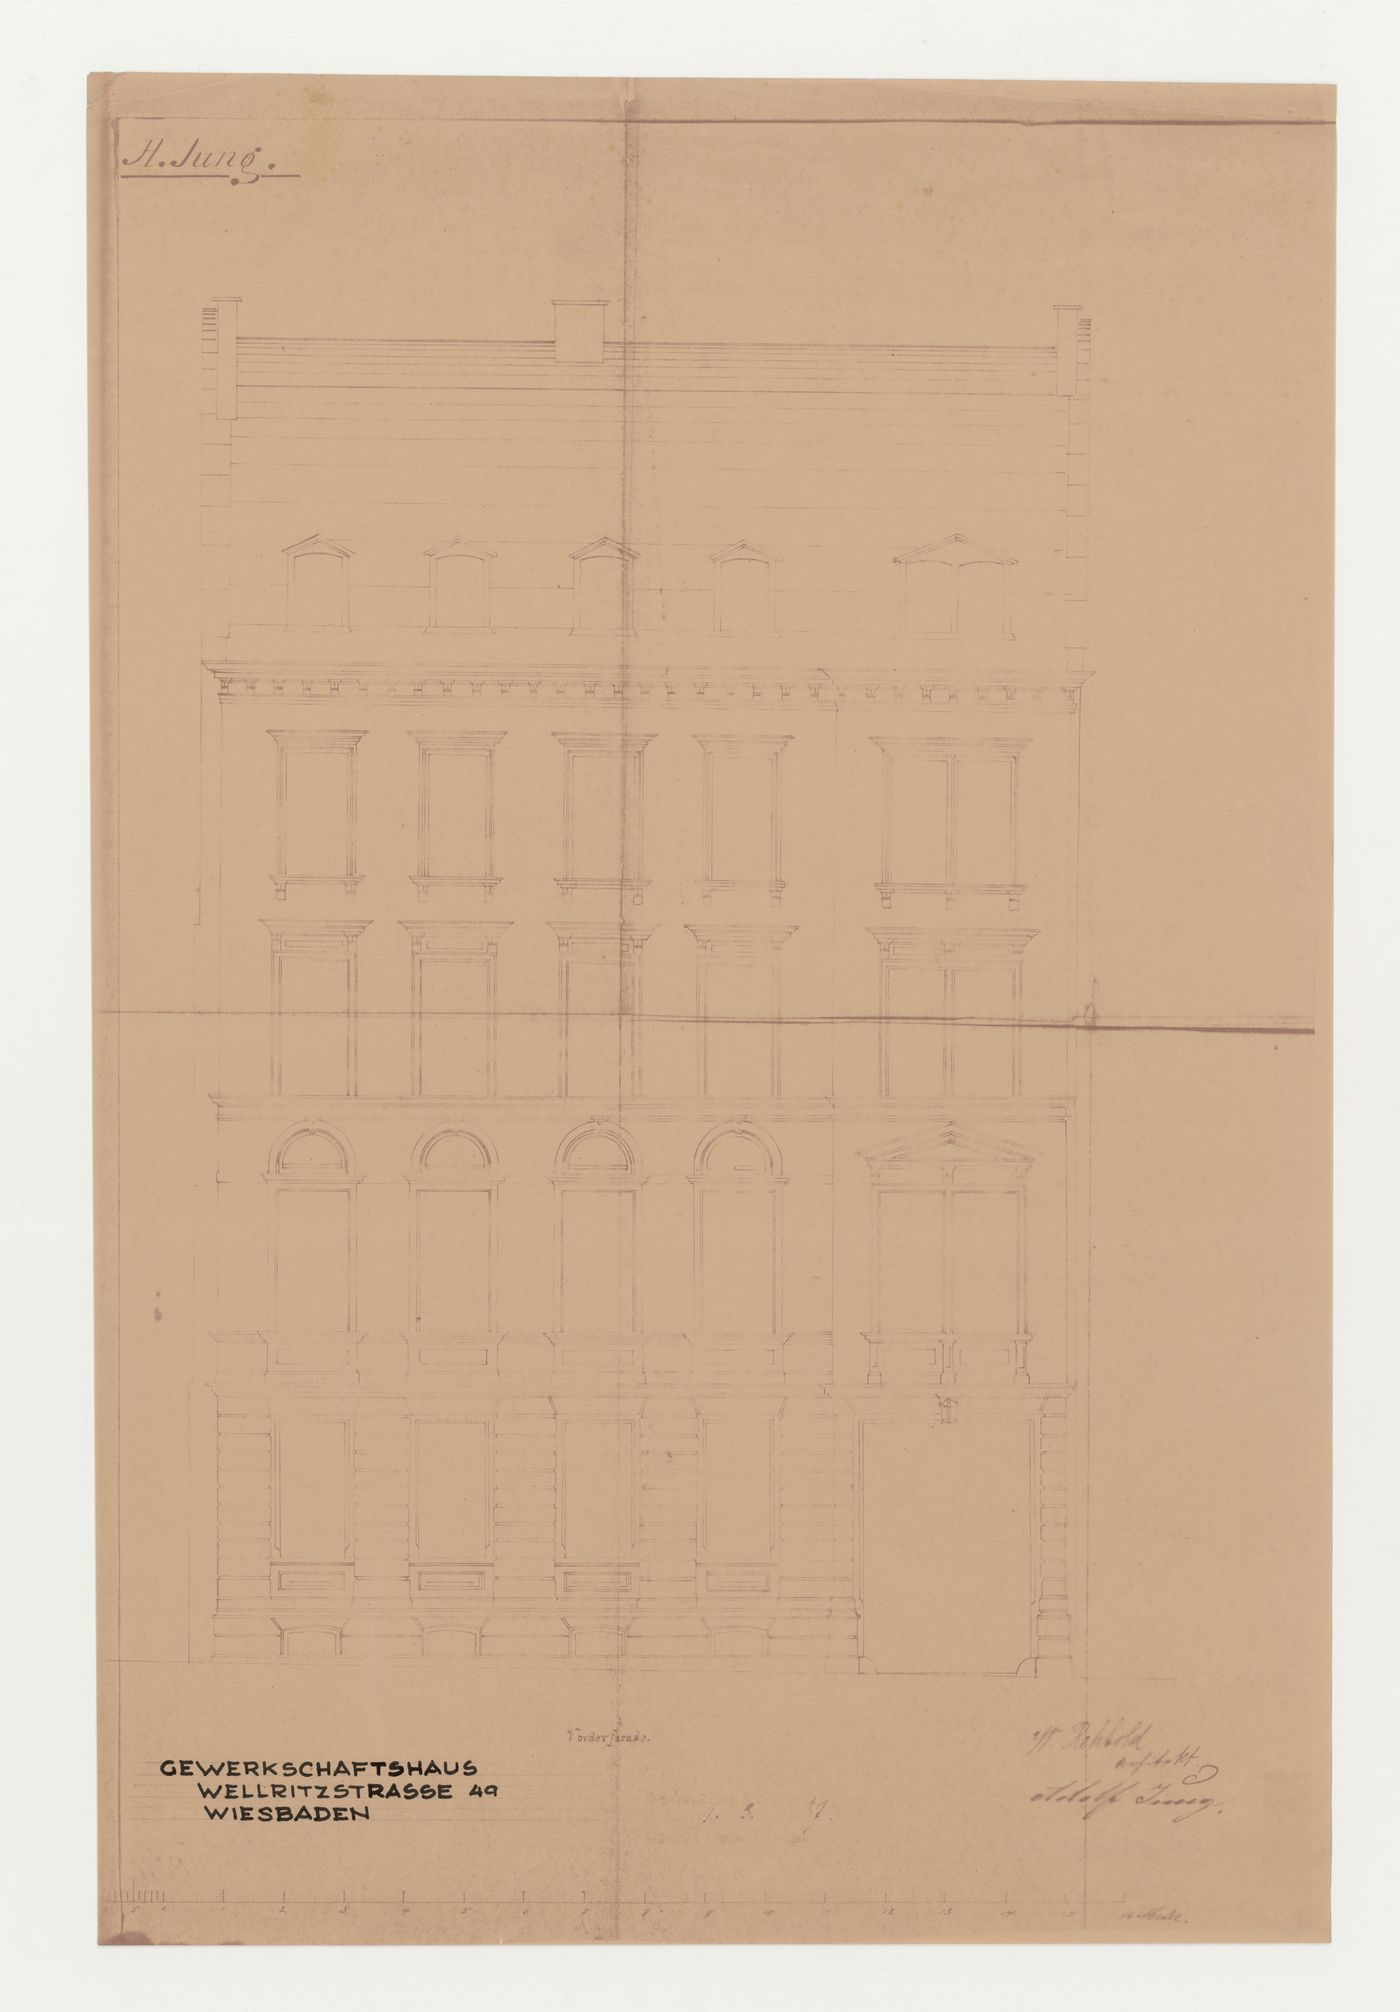 Elevation, possibly for alterations and additions for a trade union corporate headquarters, Wiesbaden, Germany